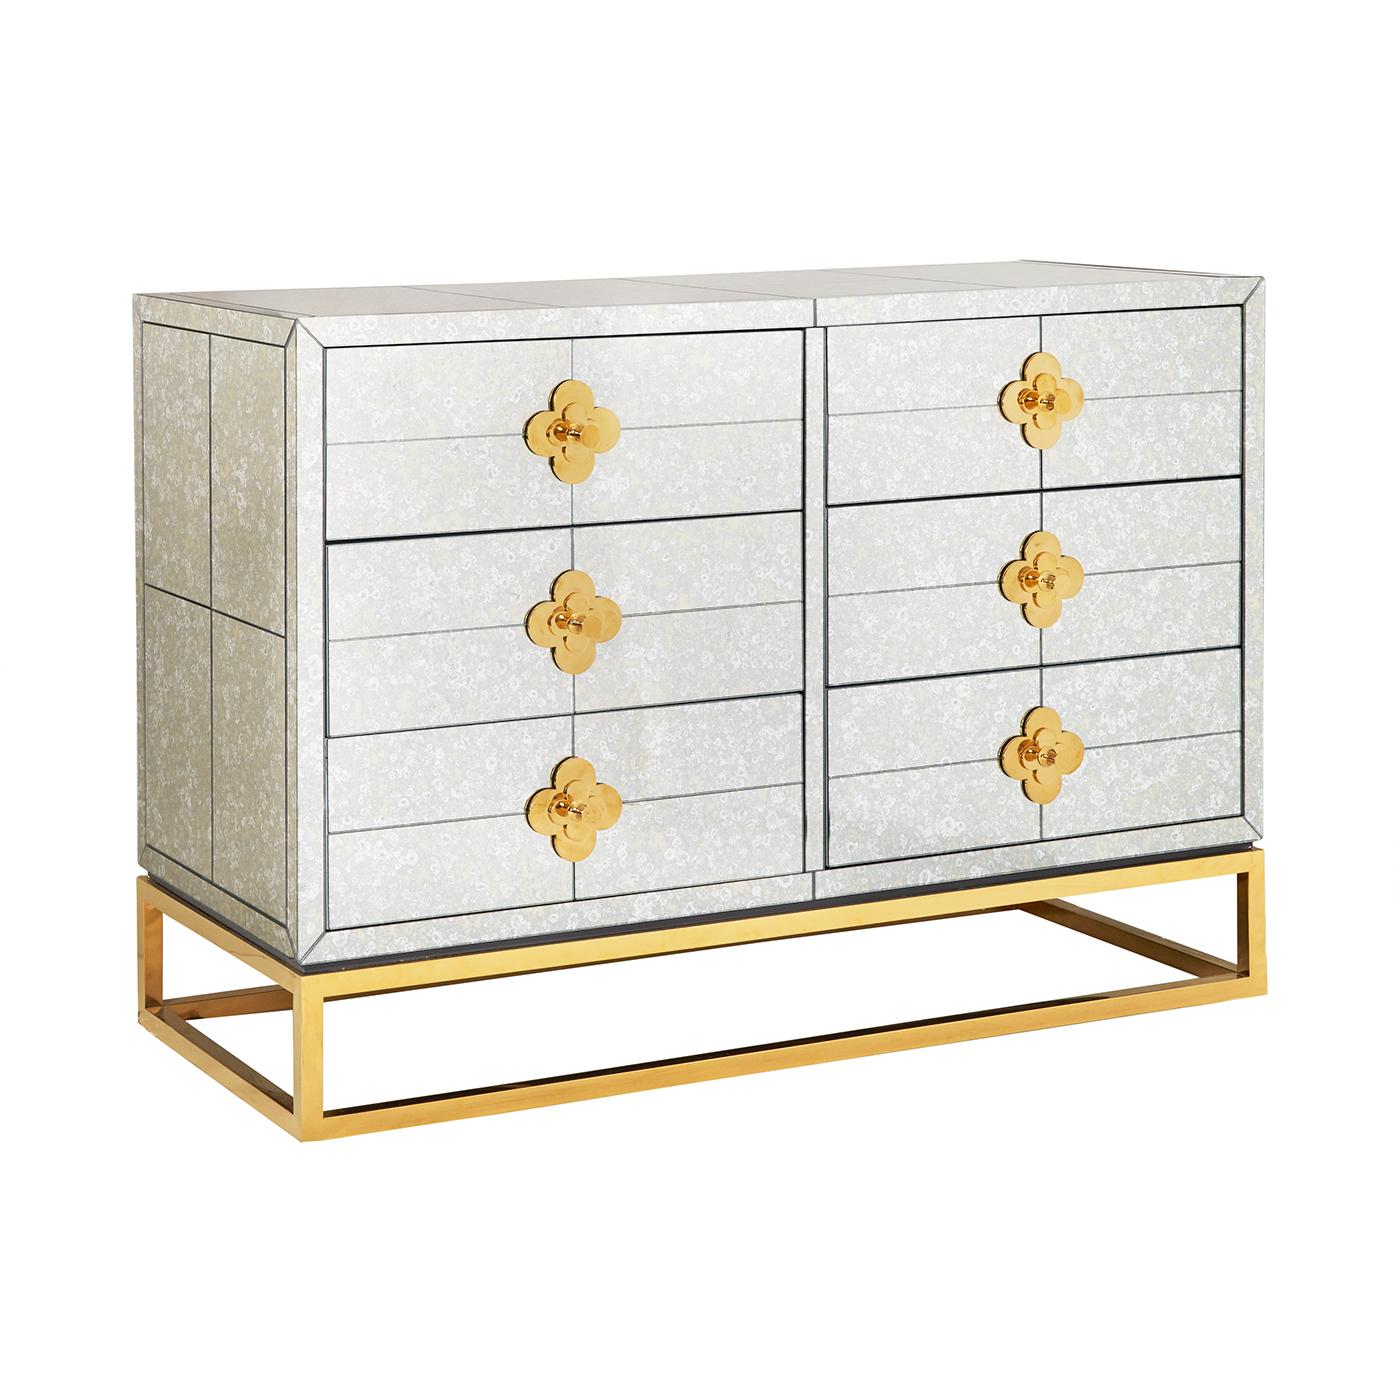 Reflectology. Minimalist forms meet Maximalist glamour. Our Delphine six-drawer dresser features antiqued mirror with a polished brass base and jewel-like quatrefoil escutcheons. Each drawer opens to reveal a bright robin's egg blue interior.